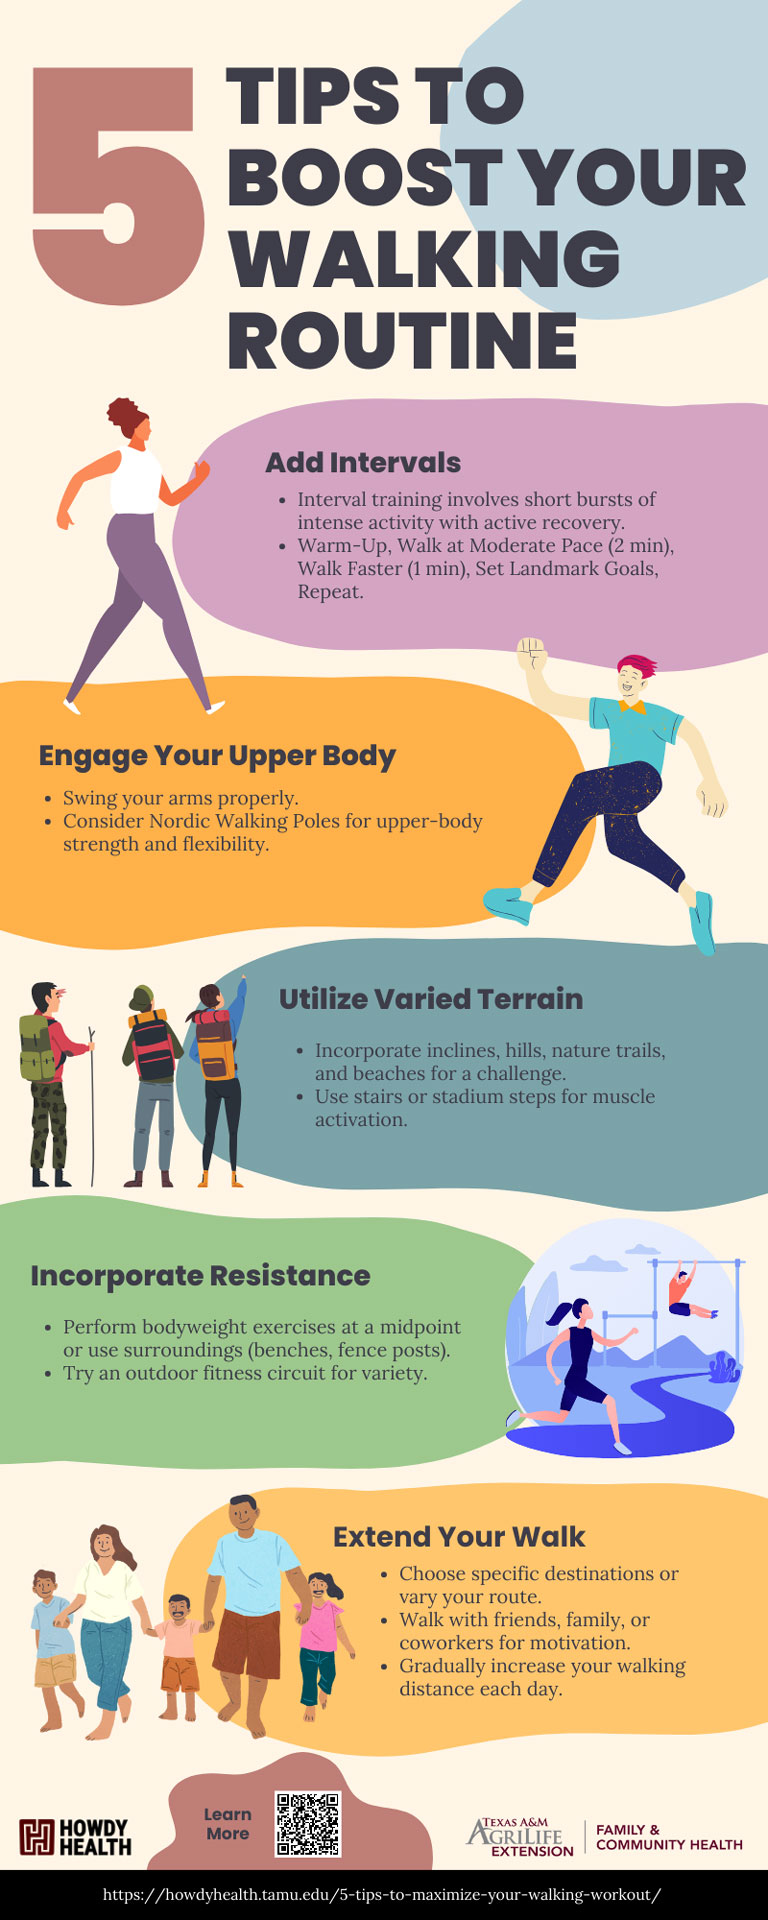 Walking Workout: 5 Tips to Boost Your Walking Routine